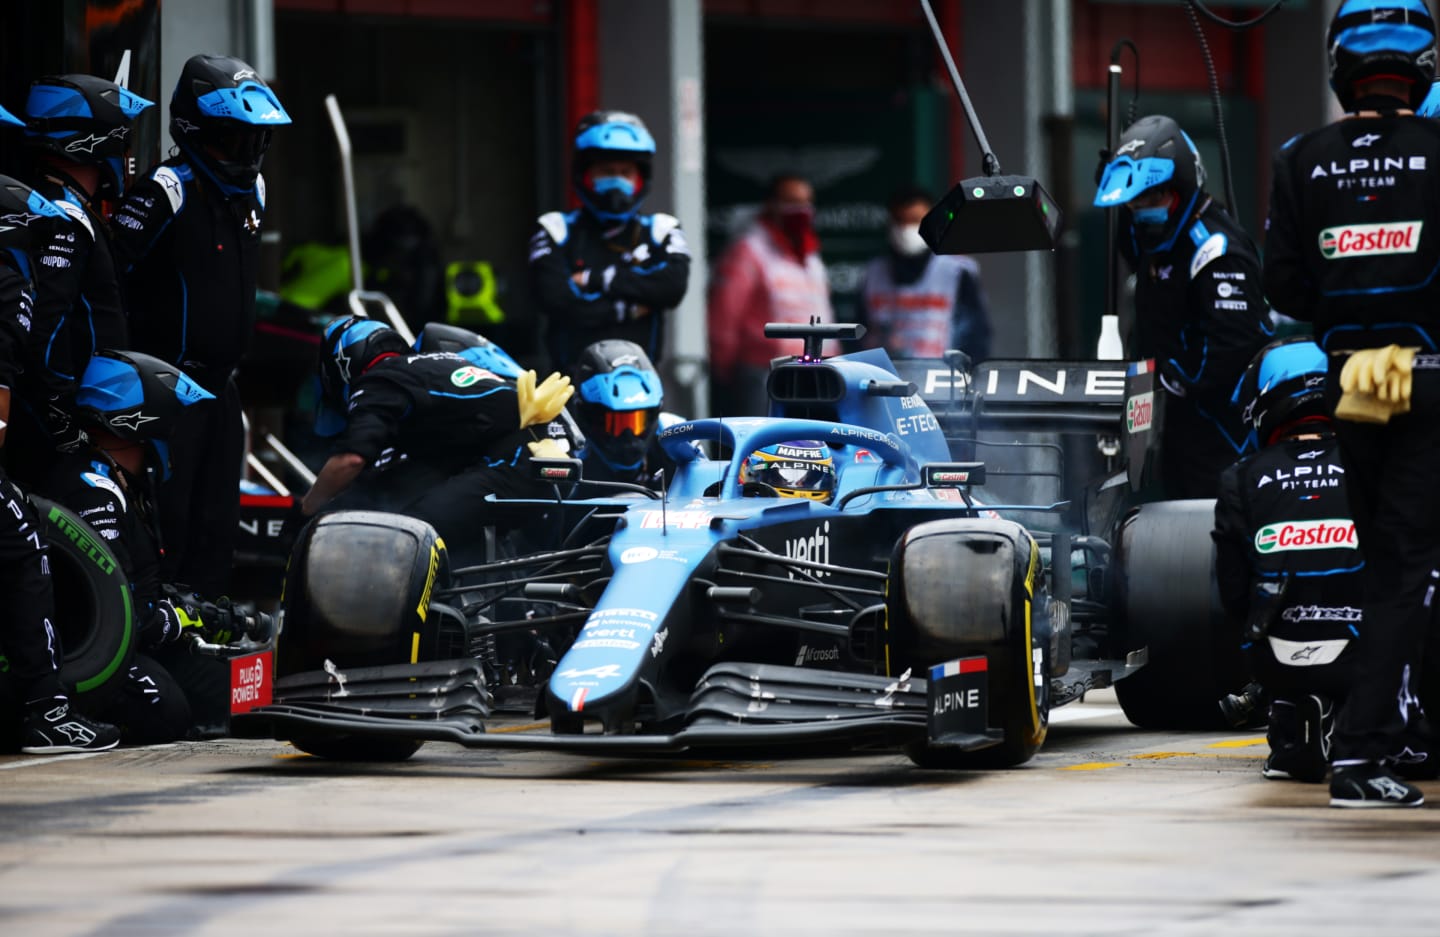 IMOLA, ITALY - APRIL 18: Fernando Alonso of Spain driving the (14) Alpine A521 Renault stops in the Pitlane during the F1 Grand Prix of Emilia Romagna at Autodromo Enzo e Dino Ferrari on April 18, 2021 in Imola, Italy. (Photo by Peter Fox/Getty Images)